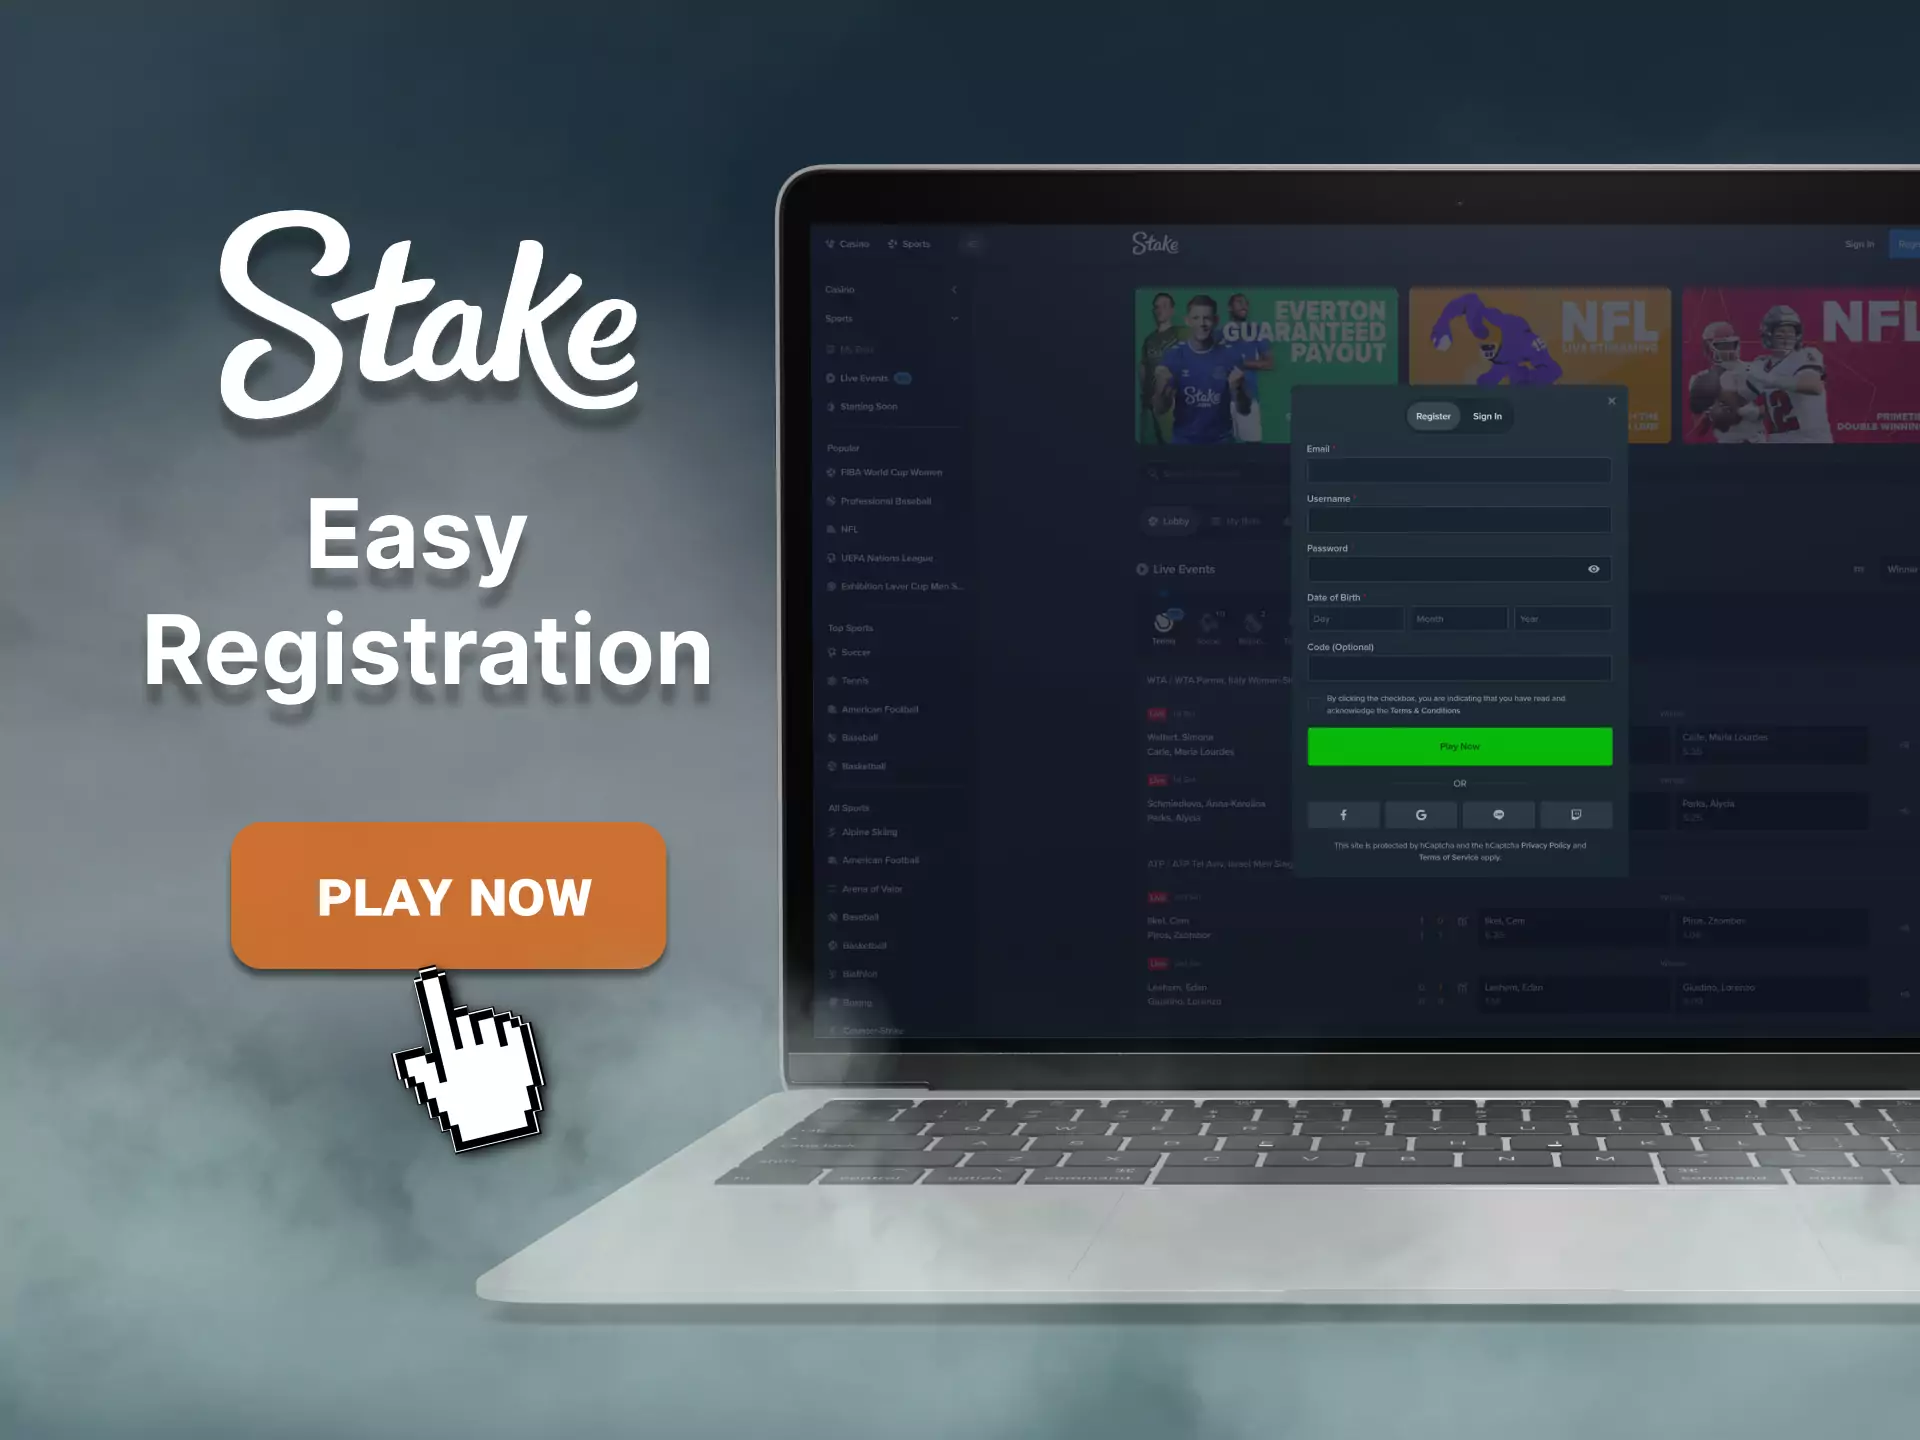 If you don't have an account on Stake yet, create your profile.